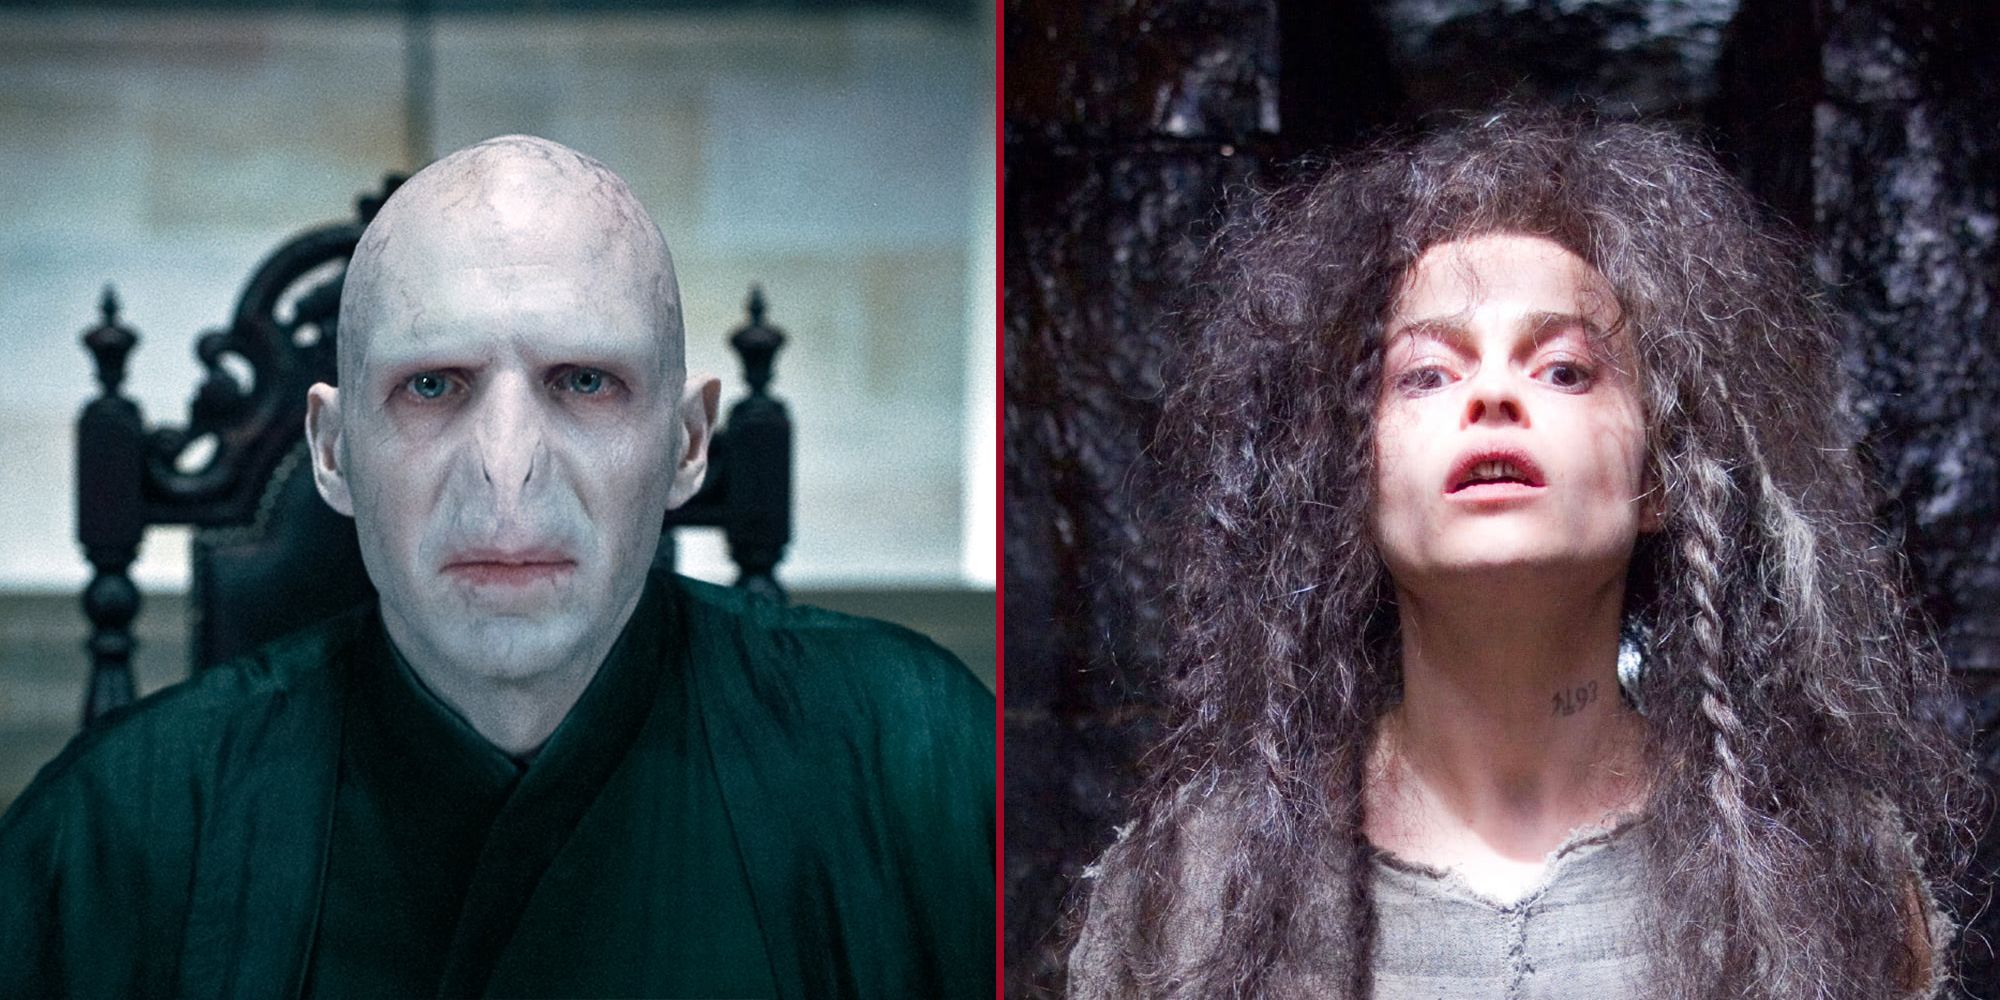 Voldemort and Bellatrix Lestrange from the Harry Potter series